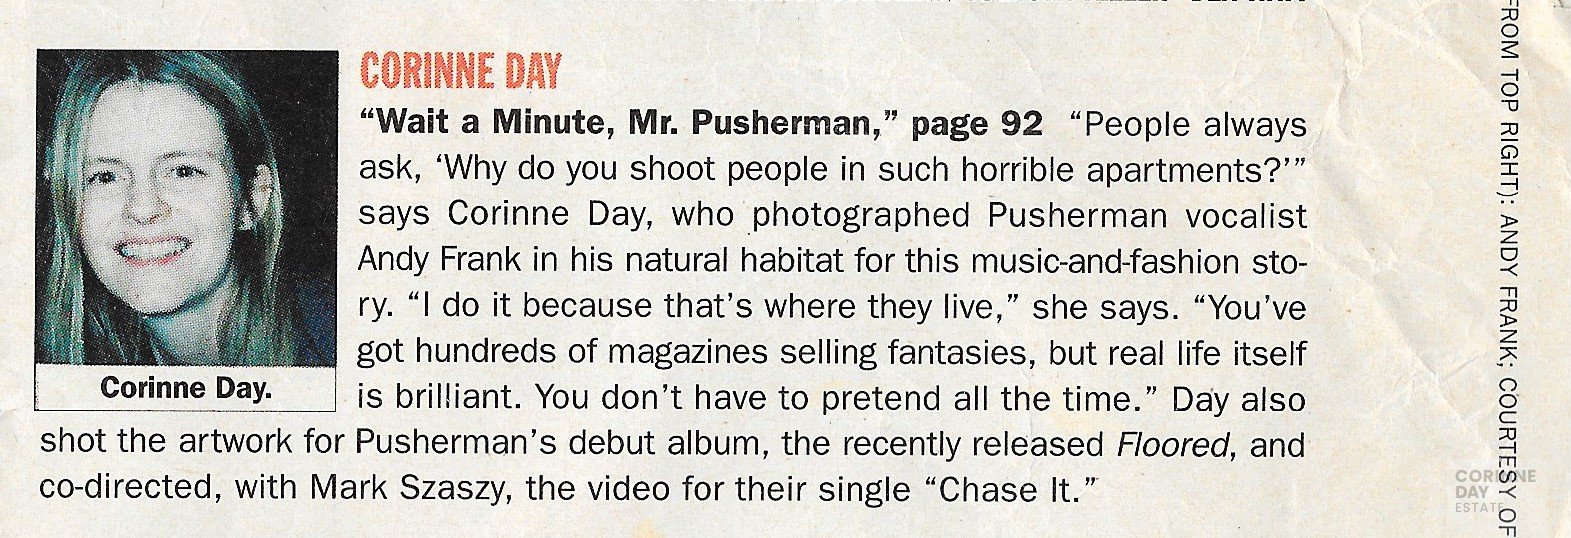 Wait a Minute Mr Pusherman, Interview, Mar 1997 — Image 1 of 1